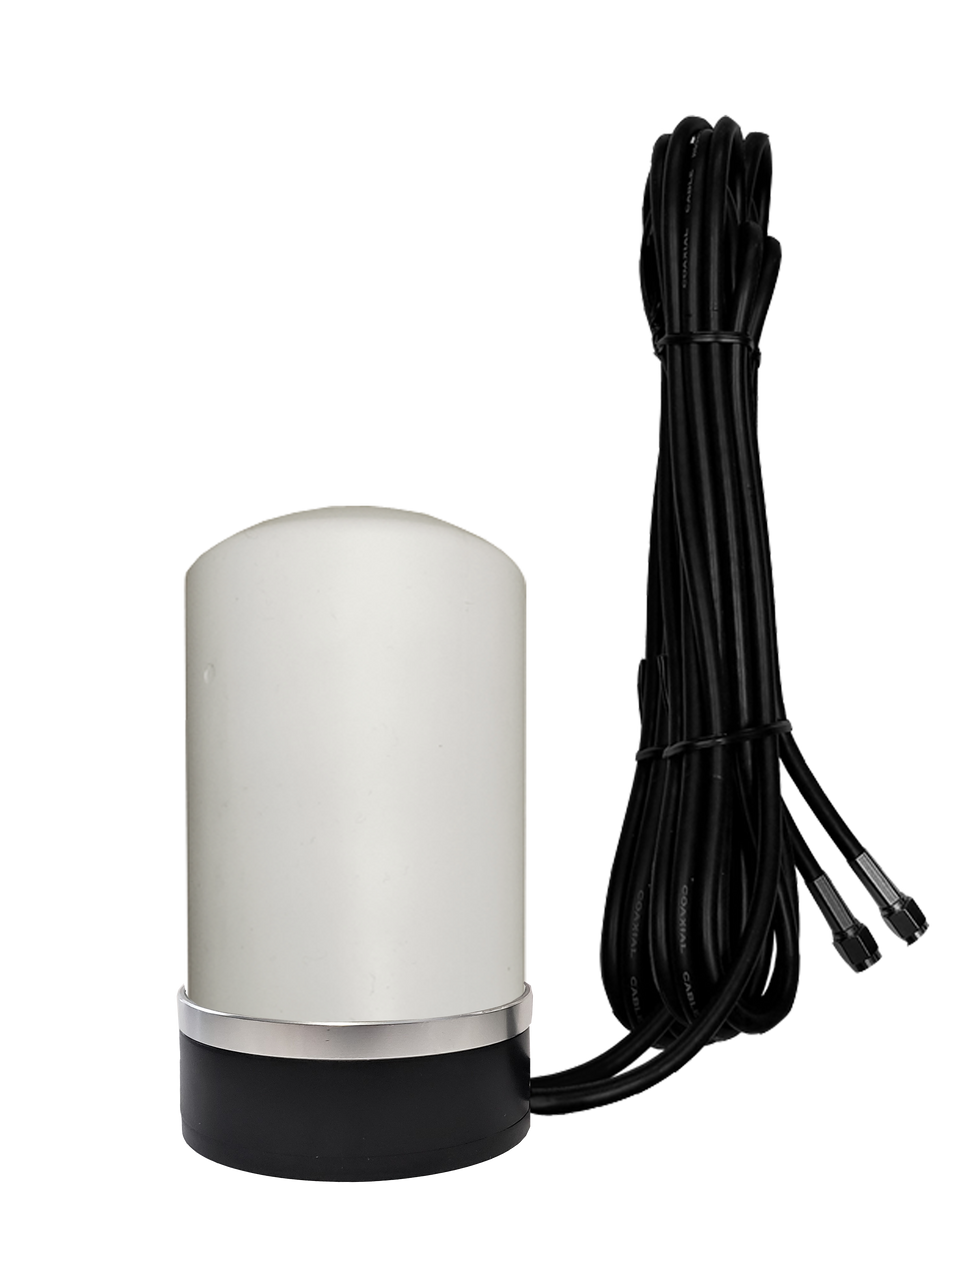 Peplink BR1-Mini - M17M Omni Directional MIMO Cellular 4G 5G LTE AWS XLTE M2M IoT Magnetic Base Antenna w/16ft Coax Cables -2  x SMA